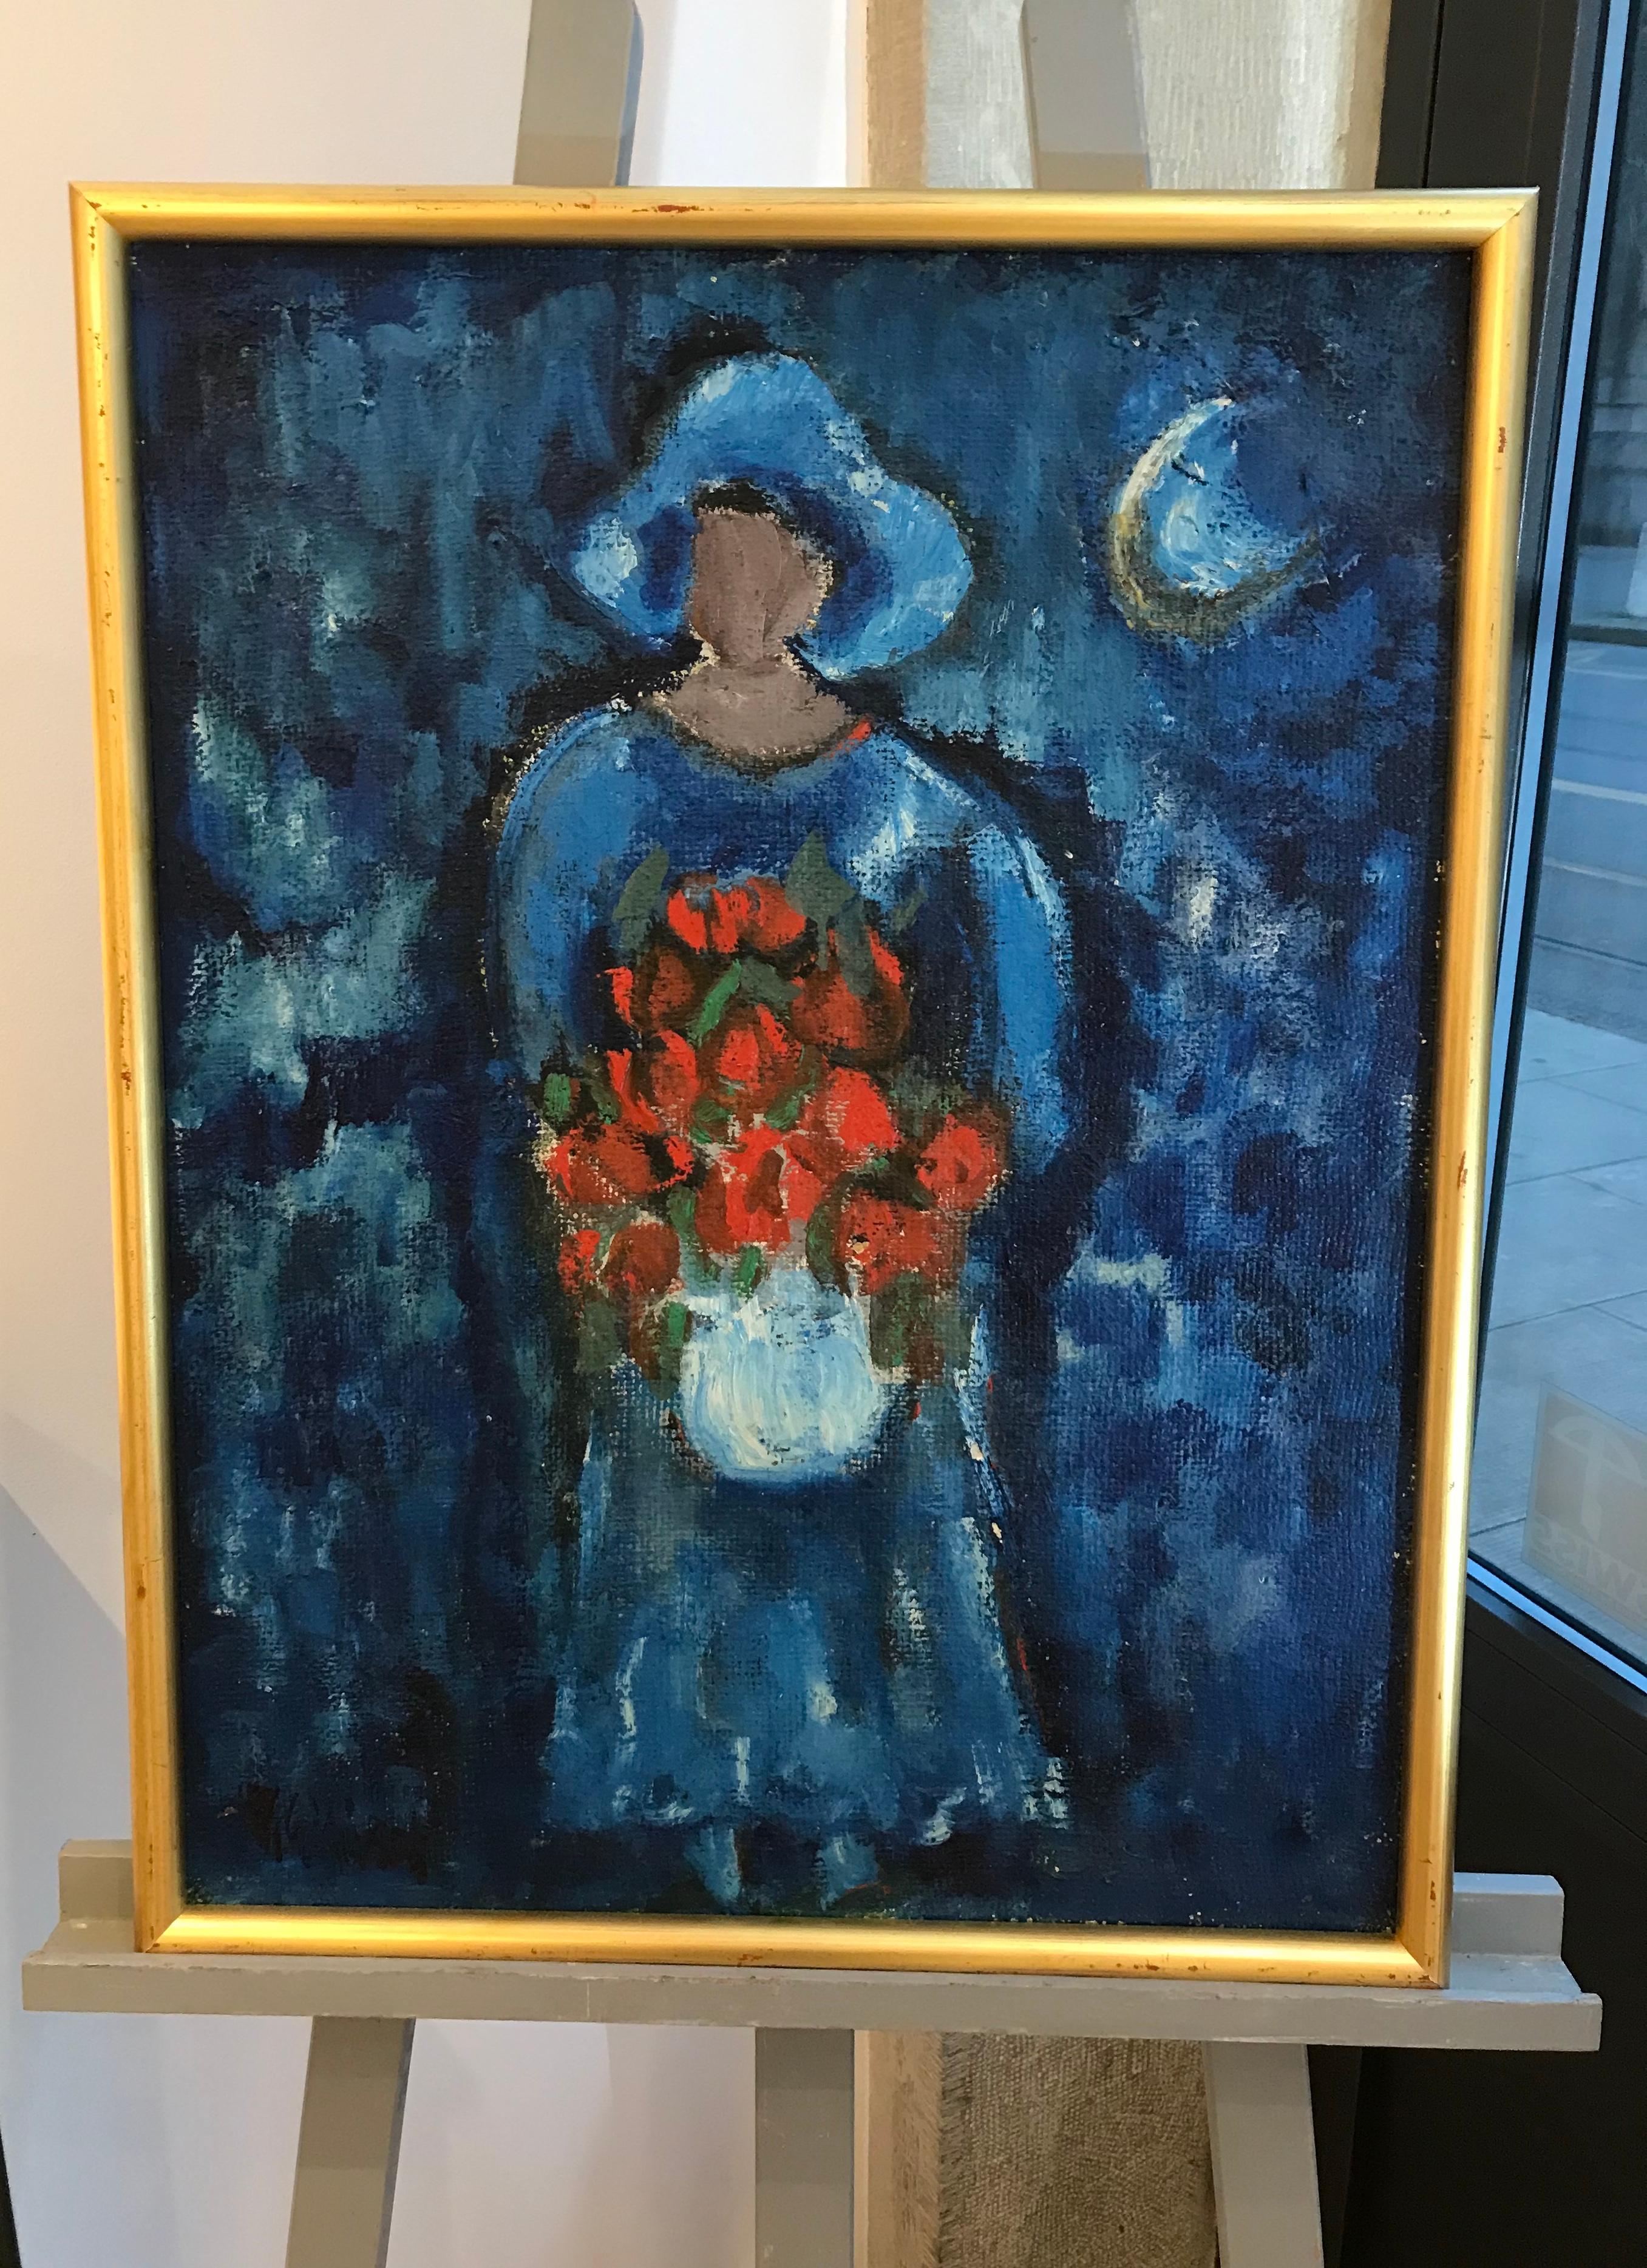 The woman with the bouquet - Painting by William Goliasch